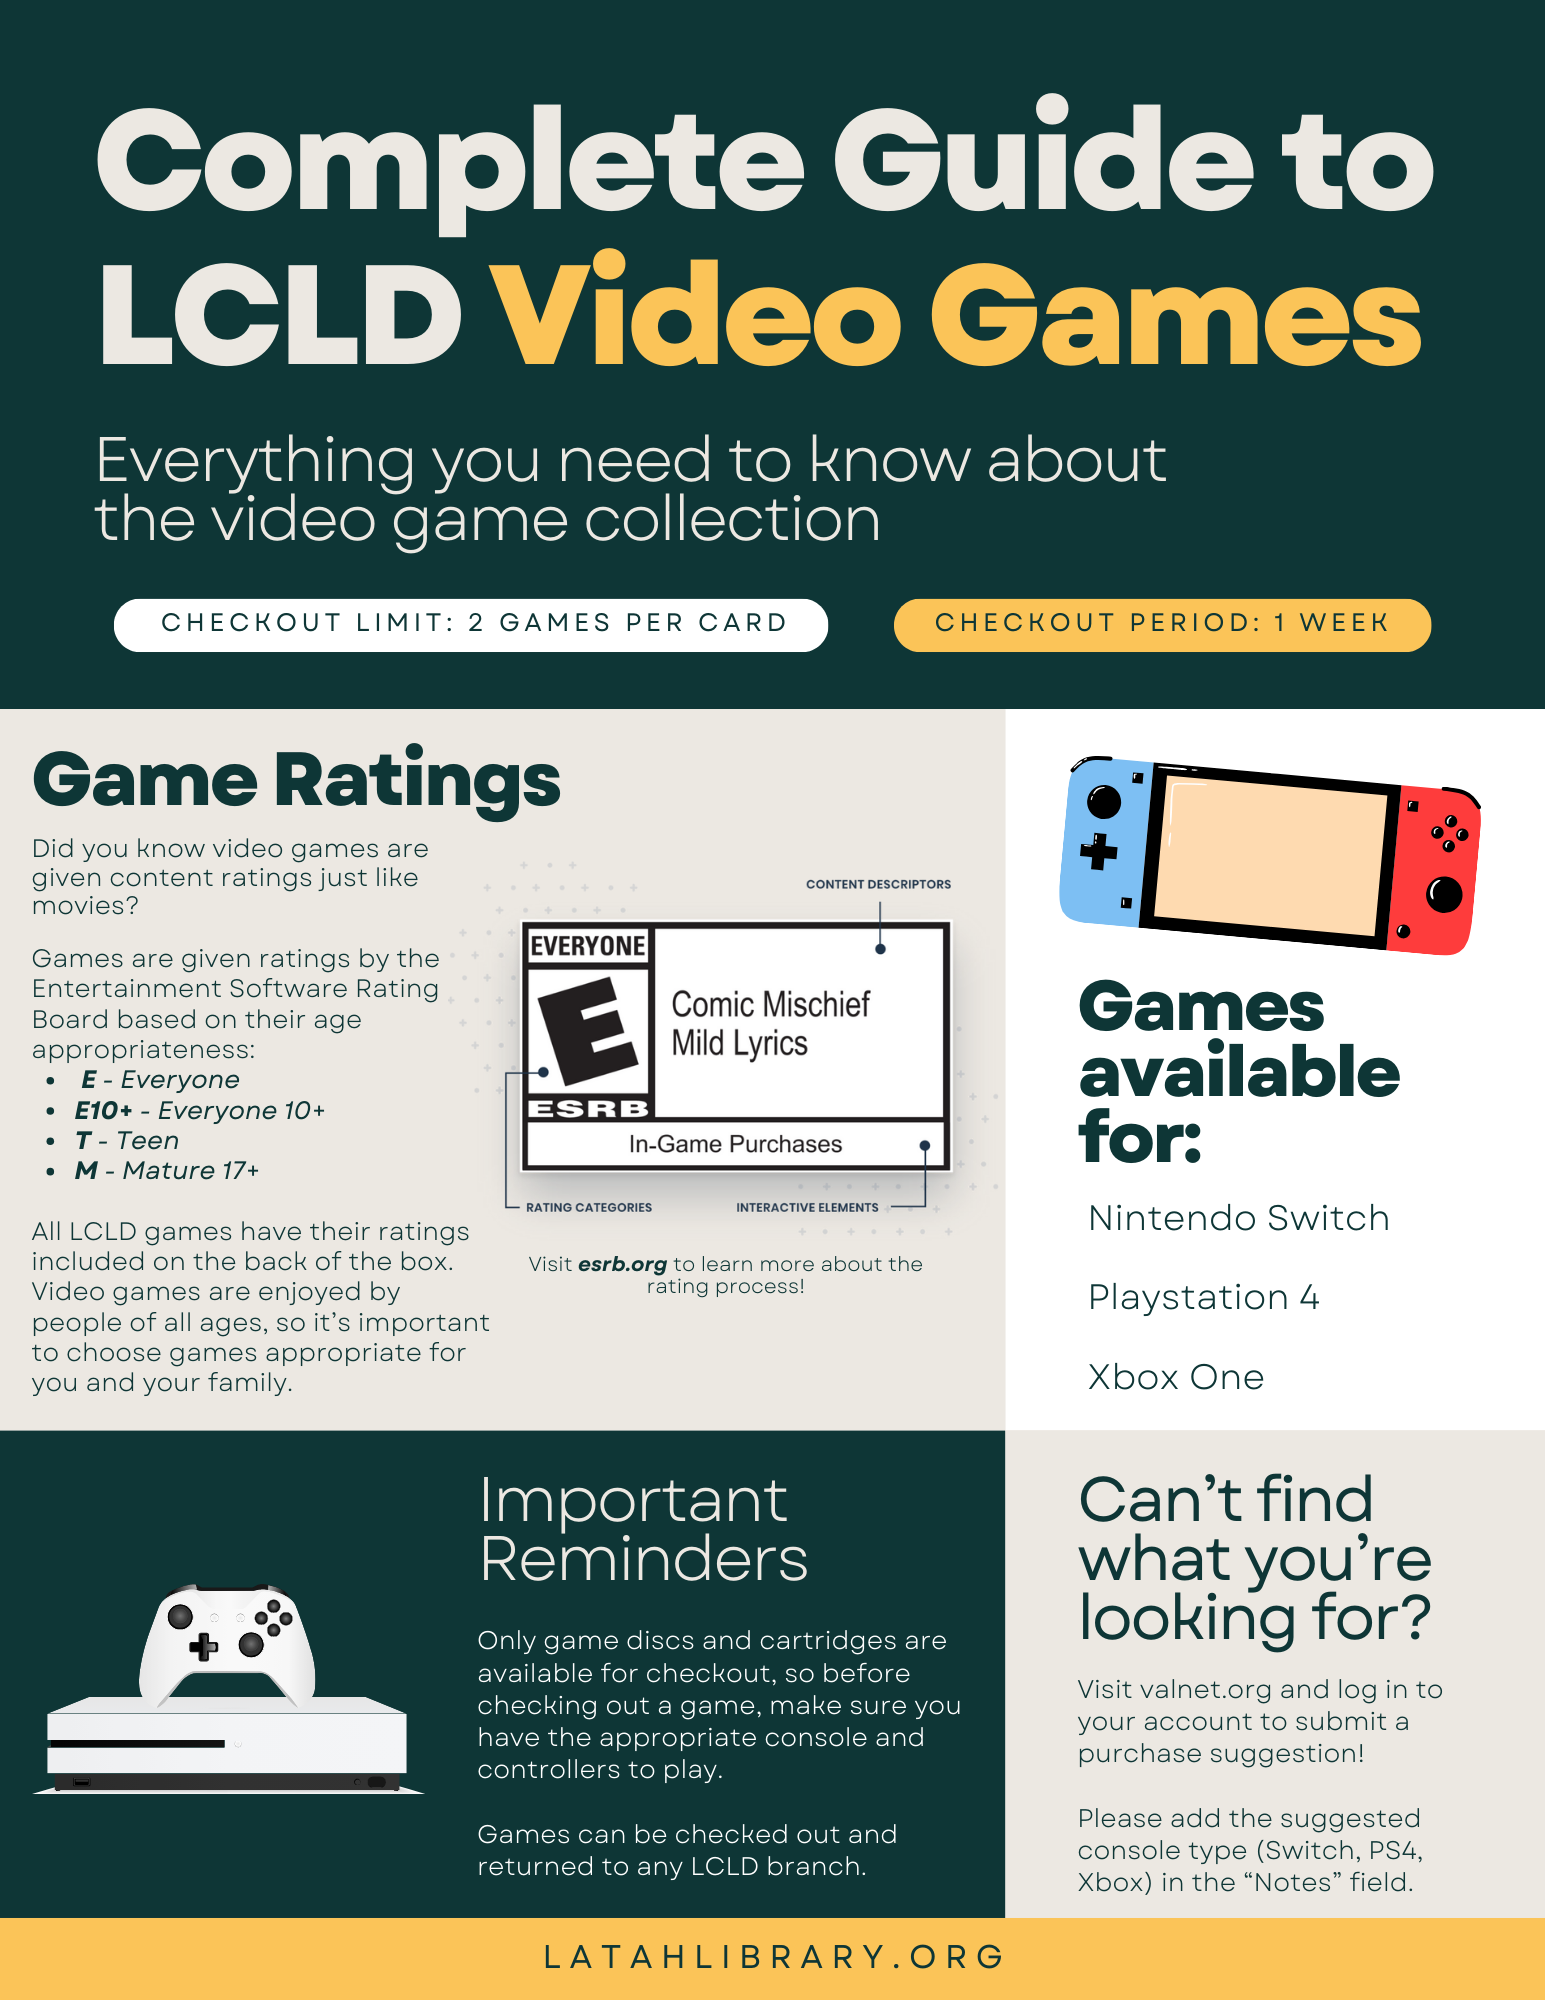 Complete Guide to LCLD Video Games